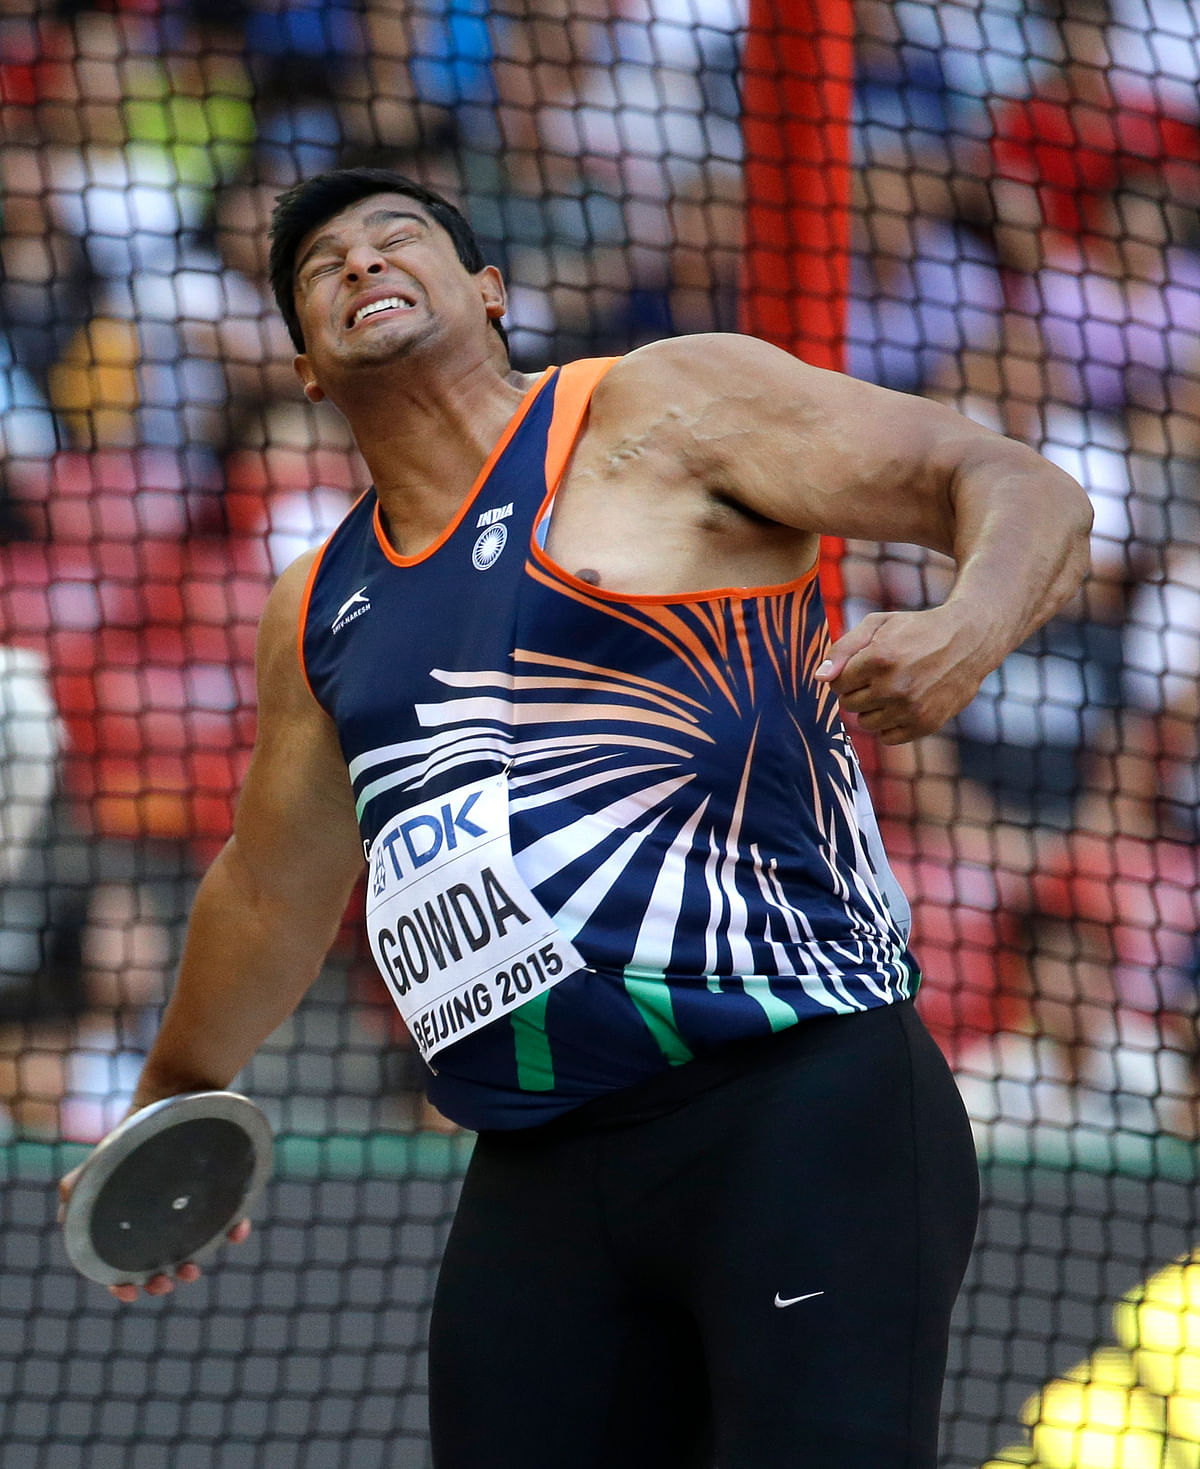 Gowda qualified for the final after finishing fourth in Group A qualification with an effort of 63.86m.